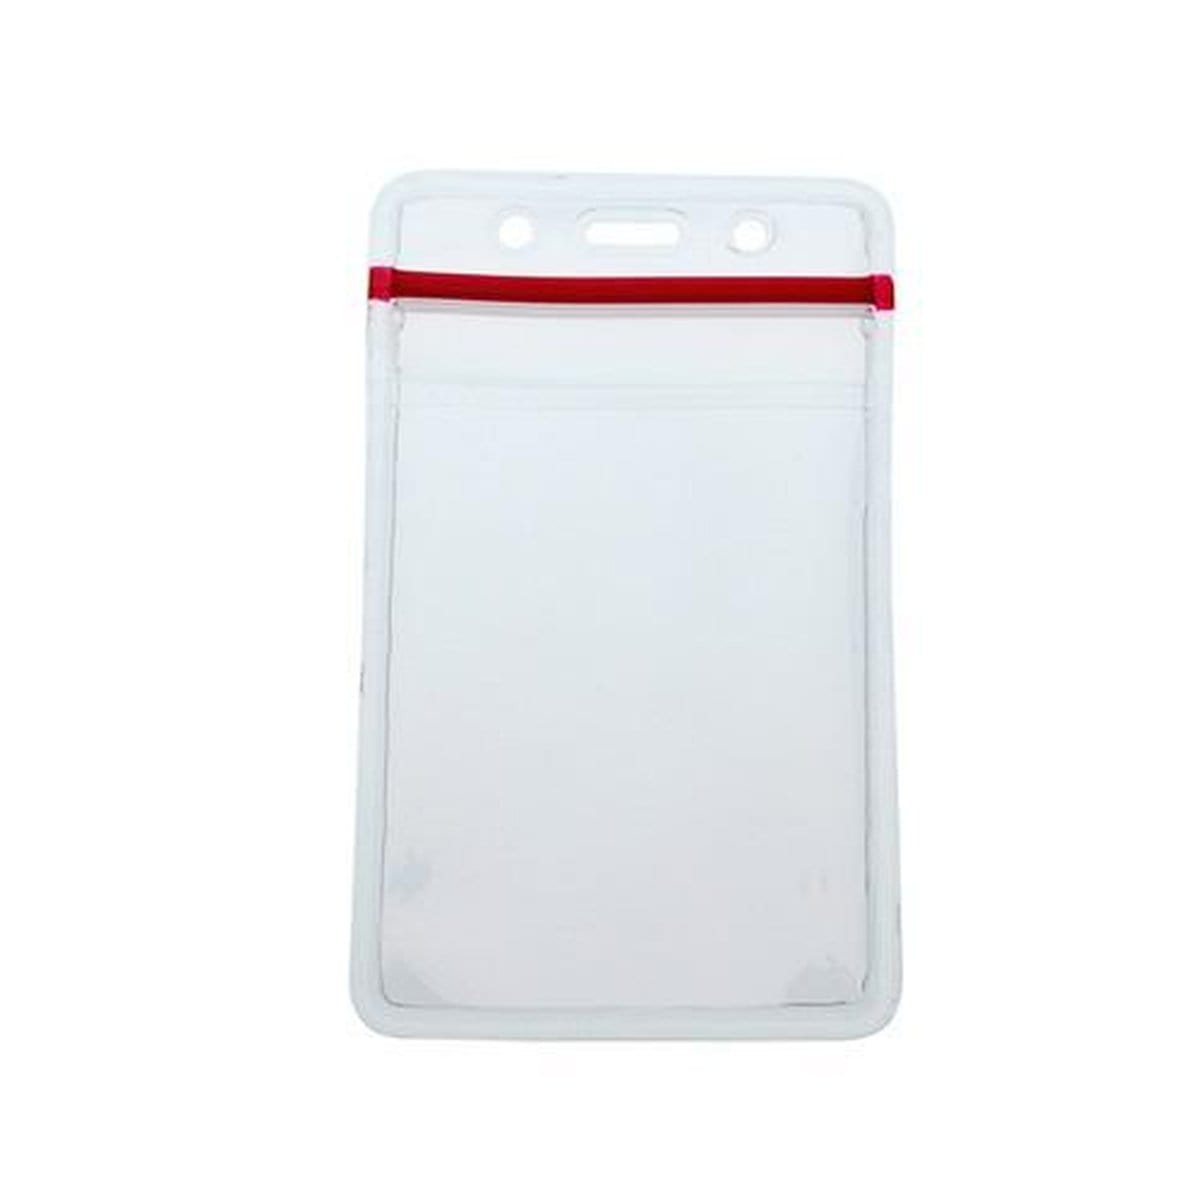 A Heavy Duty Vertical Multi-Card Badge Holder with Resealable Zip Top (1815-1110) with a clear plastic vertical ID display, featuring a resealable red zip closure and two holes at the top for attaching a lanyard.